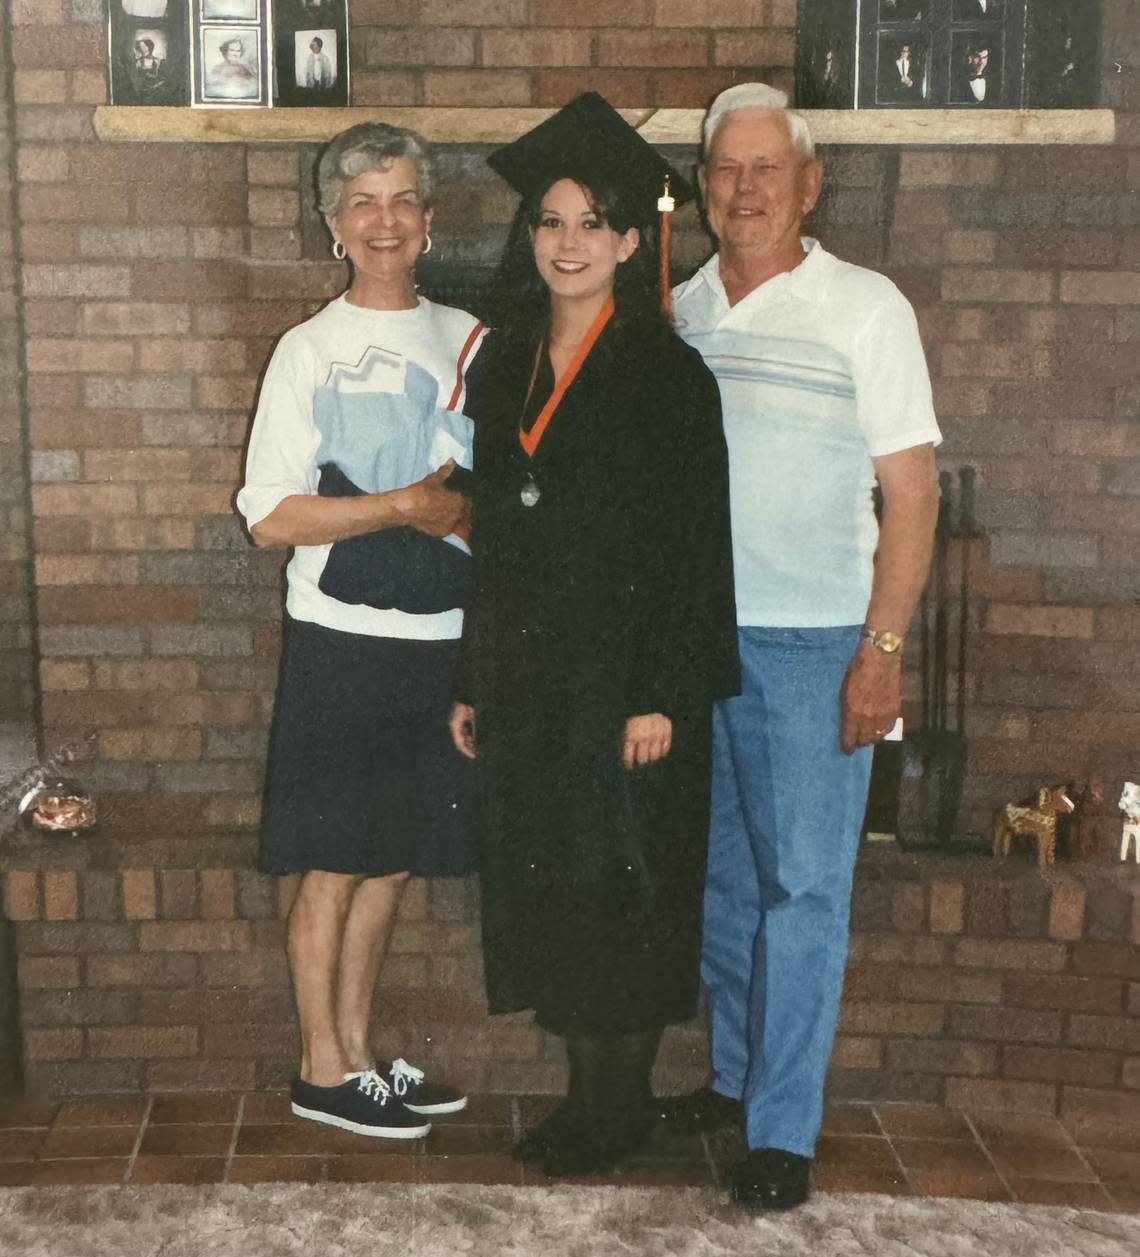 Katie Grover, center, is pictured after her high school graduation with her maternal grandmother, Genevieve Slack Meditz, and grandfather, Lloyd Meditz. Genevieve, who died in 2013, insisted that Katie learn as a young woman to make her famous povitica. Courtesy/Katie Grover